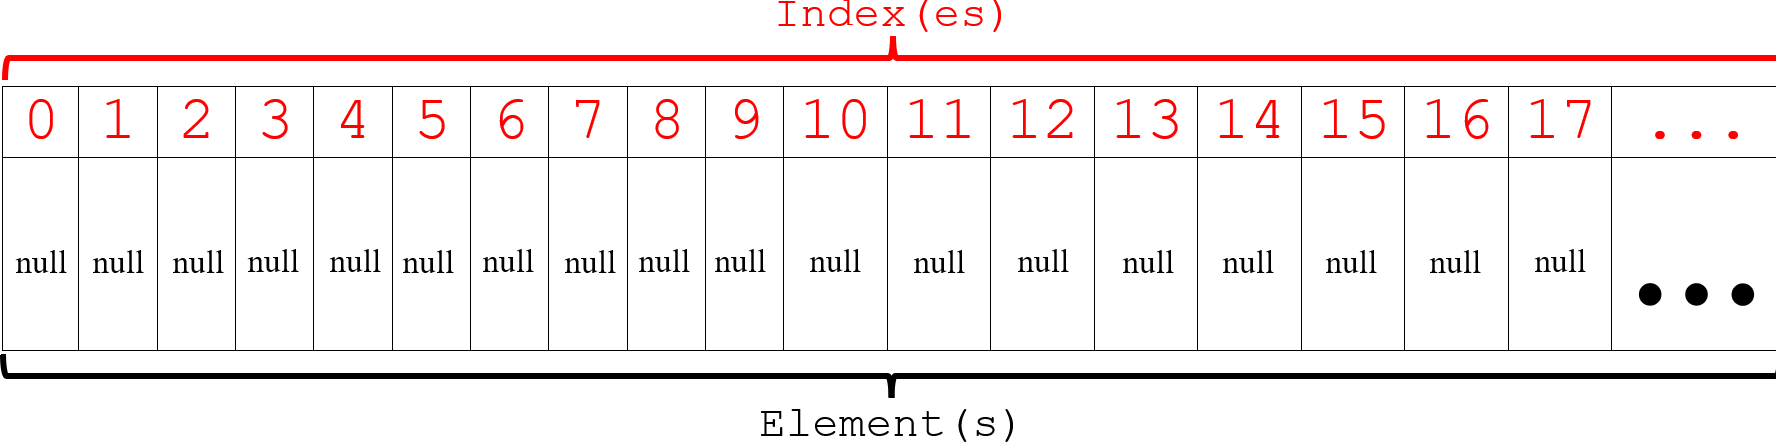 ArrayList structure with its content(s) and index(es)